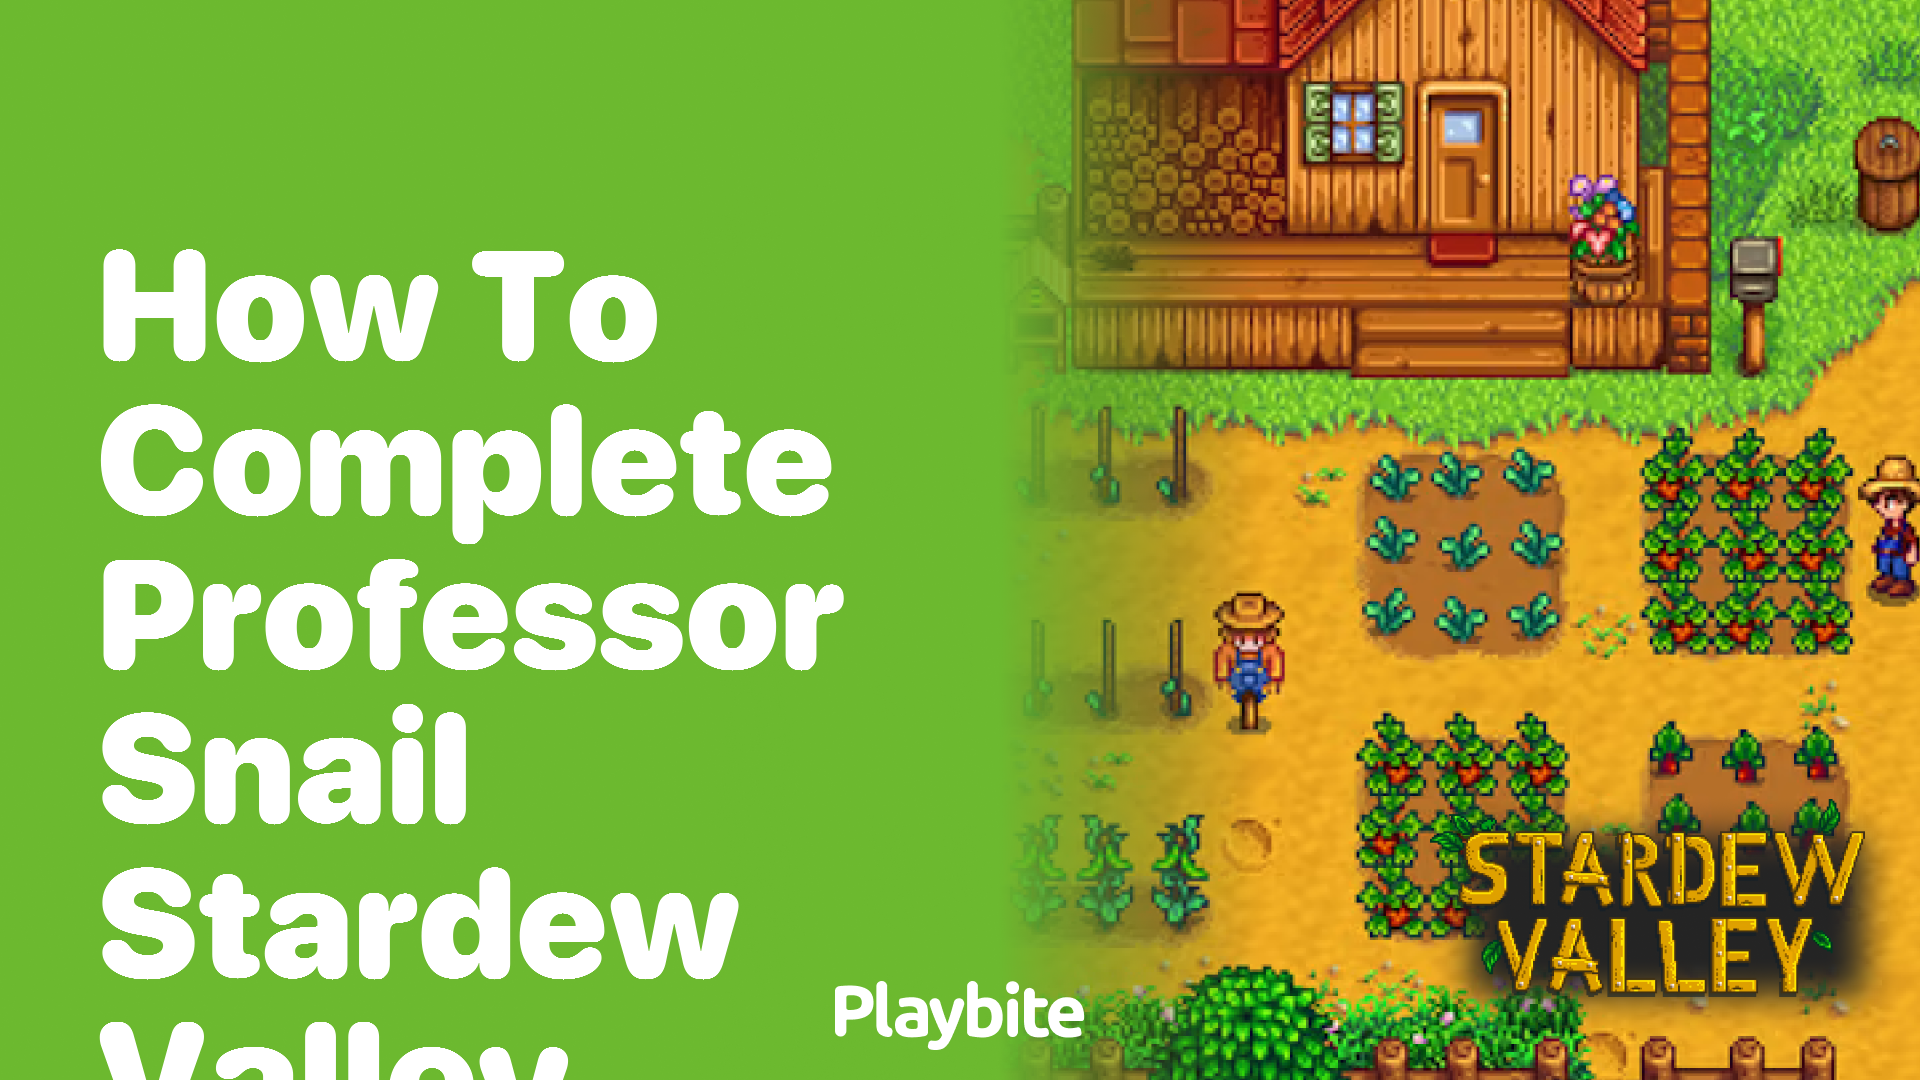 How to Complete Professor Snail Quests in Stardew Valley